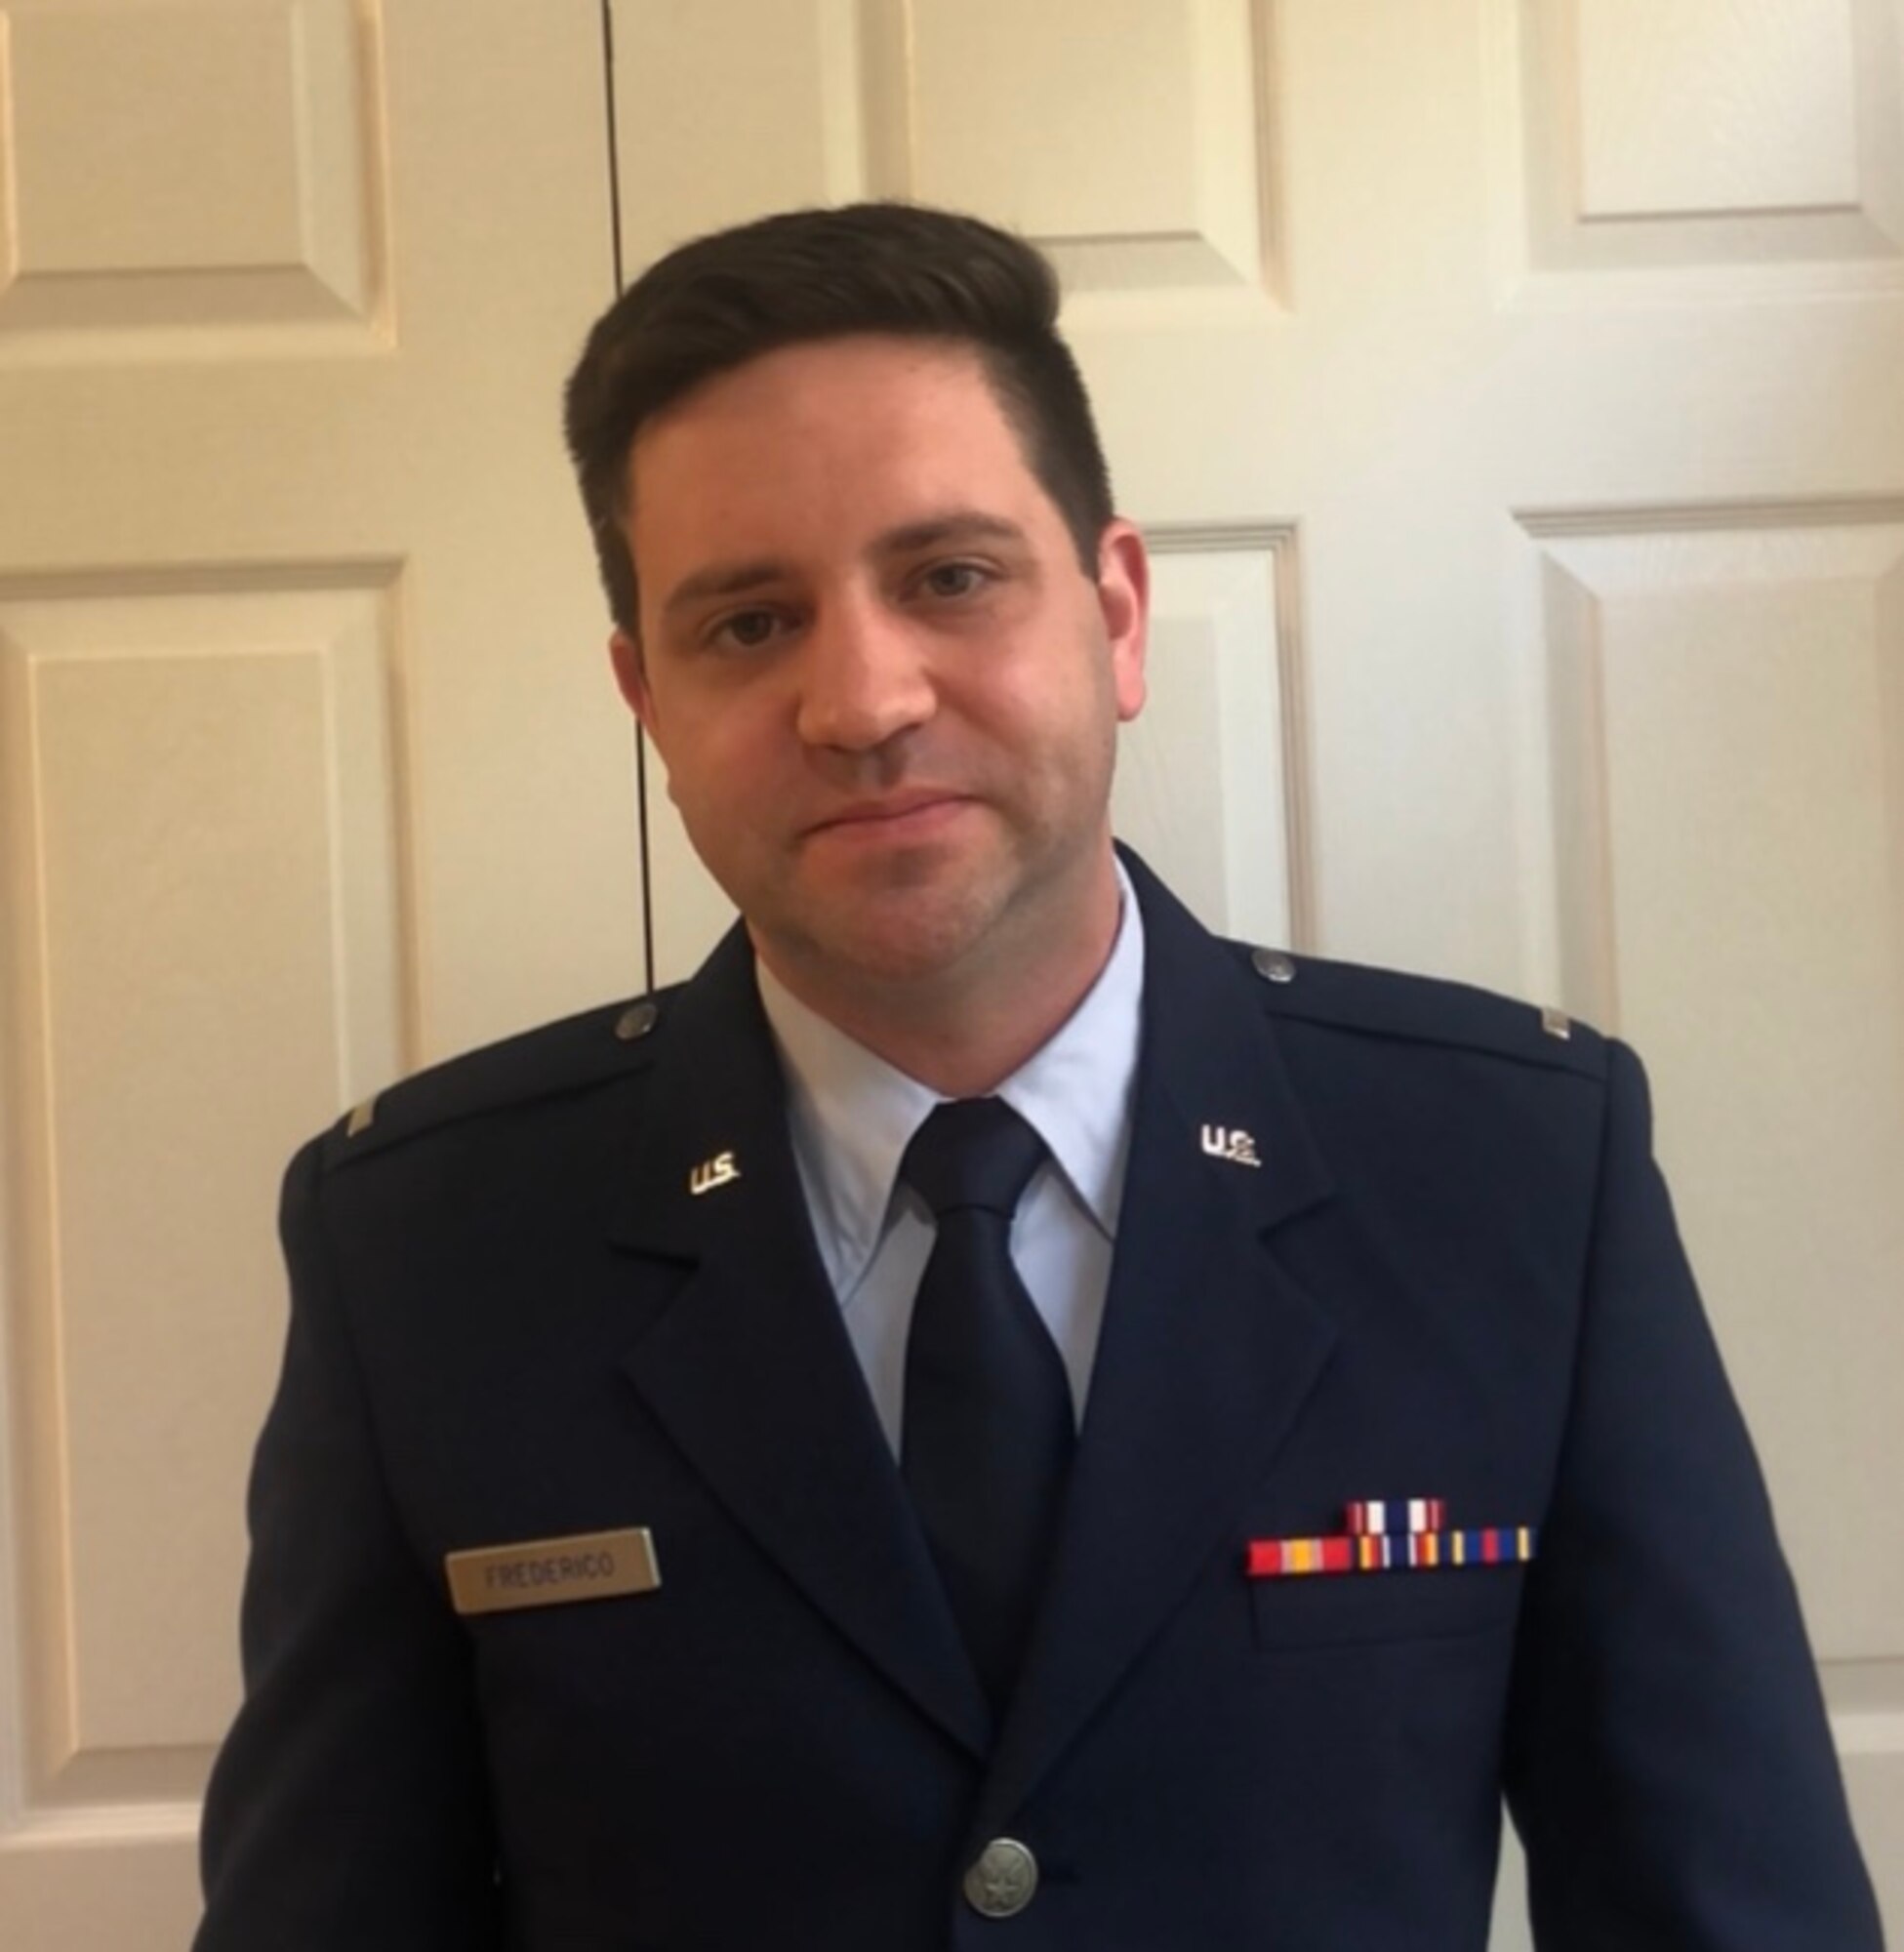 Air Force 1st Lt. Nick Frederico, a member of the Connecticut Air National Guard assigned to the 103rd Medical Group, is a licensed pilot. Frederico completed a Doctor of Medicine degree at the University of Connecticut School of Medicine in May 2020. (Photo courtesy of 1st Lt. Nick Frederico)